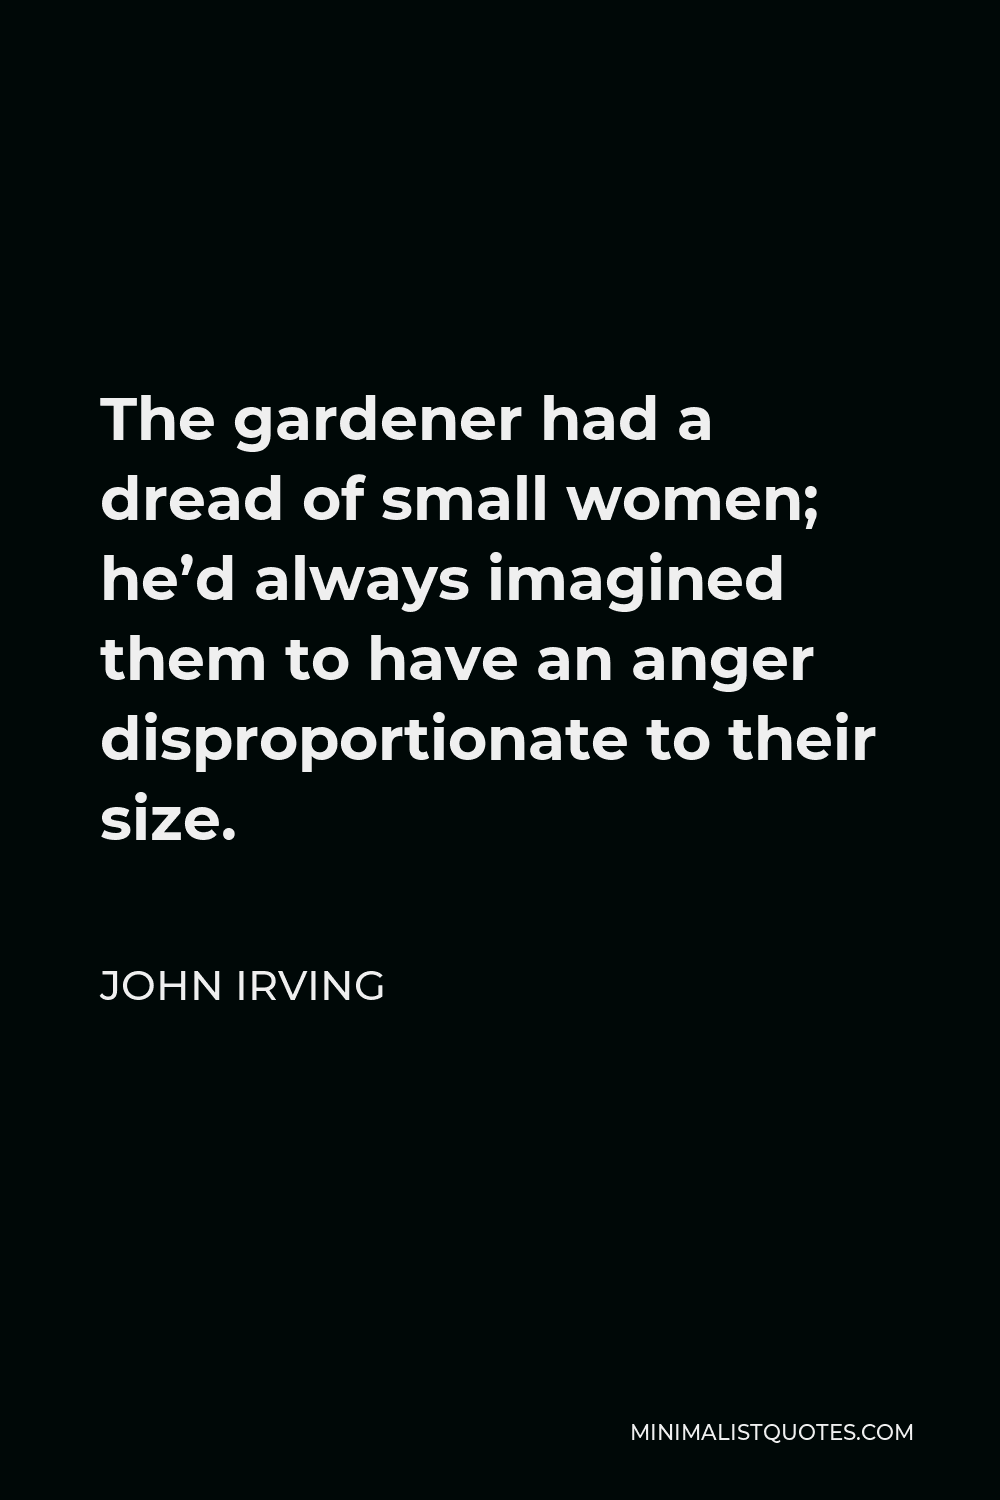 John Irving Quote - The gardener had a dread of small women; he’d always imagined them to have an anger disproportionate to their size.